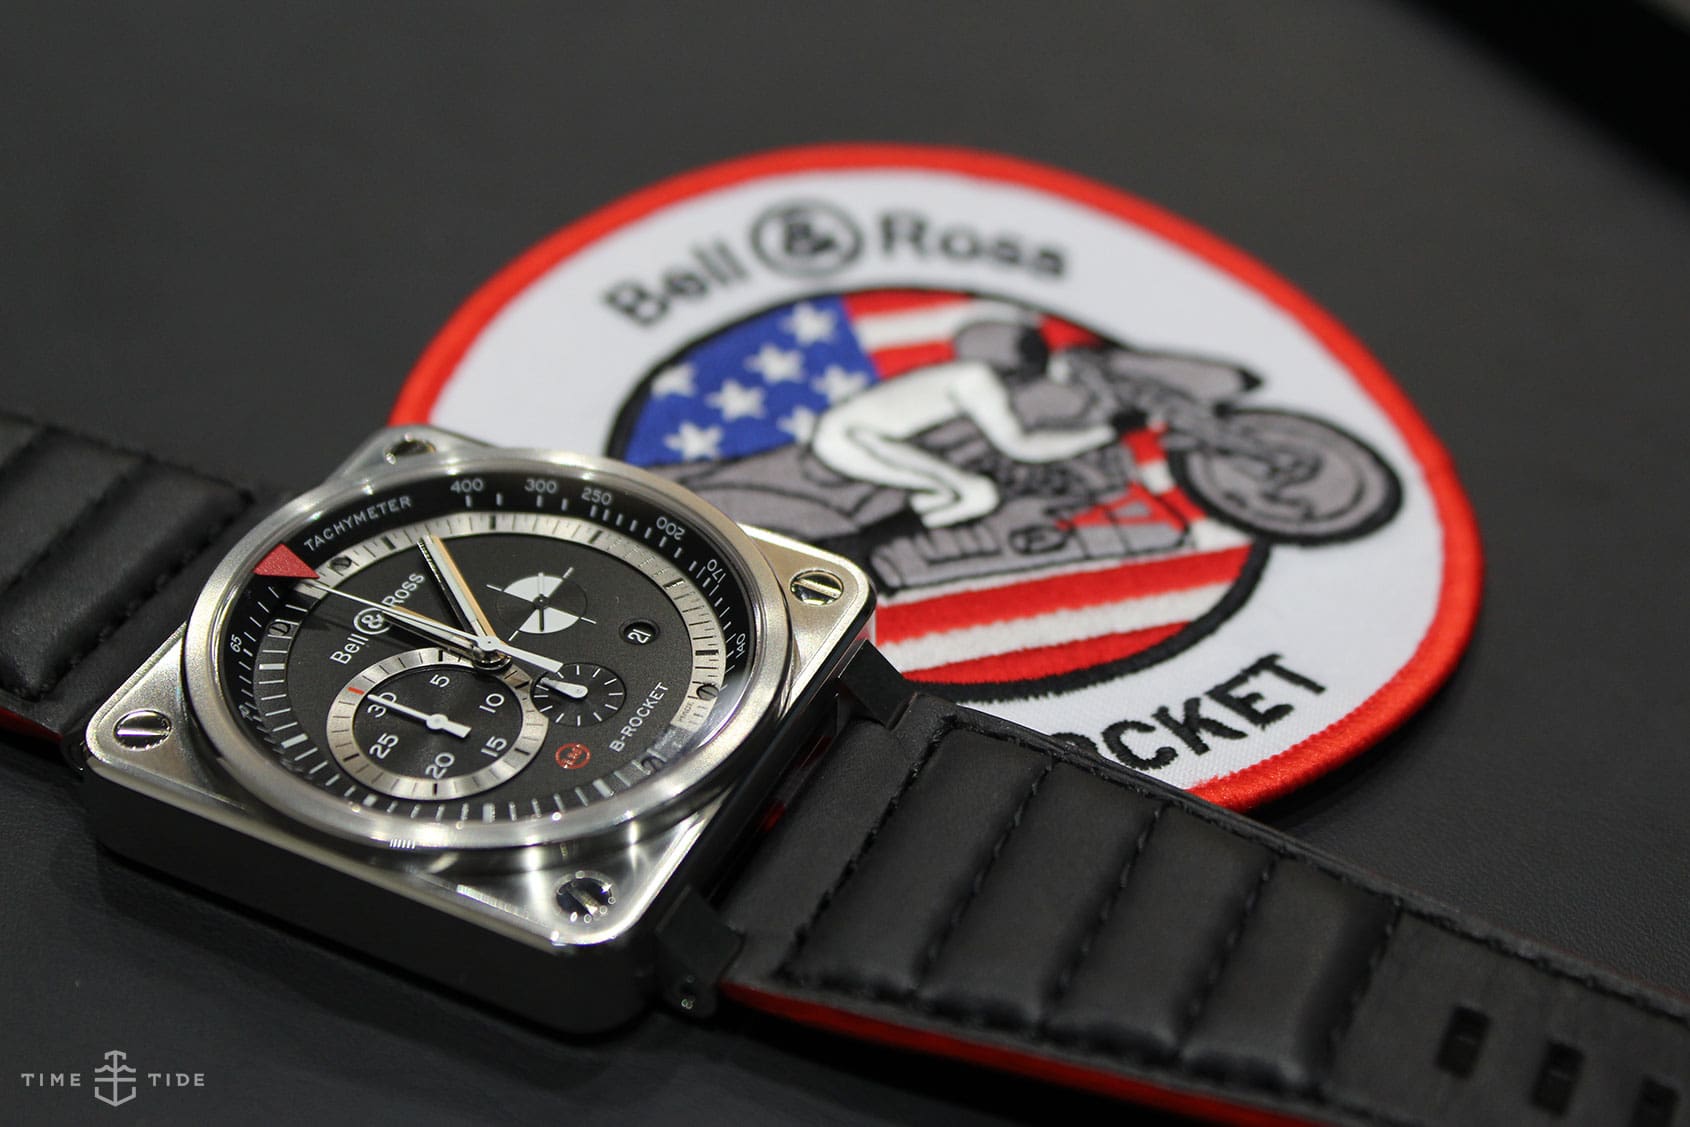 REVIEW: Hands on with the Bell&Ross BR01 B-Rocket